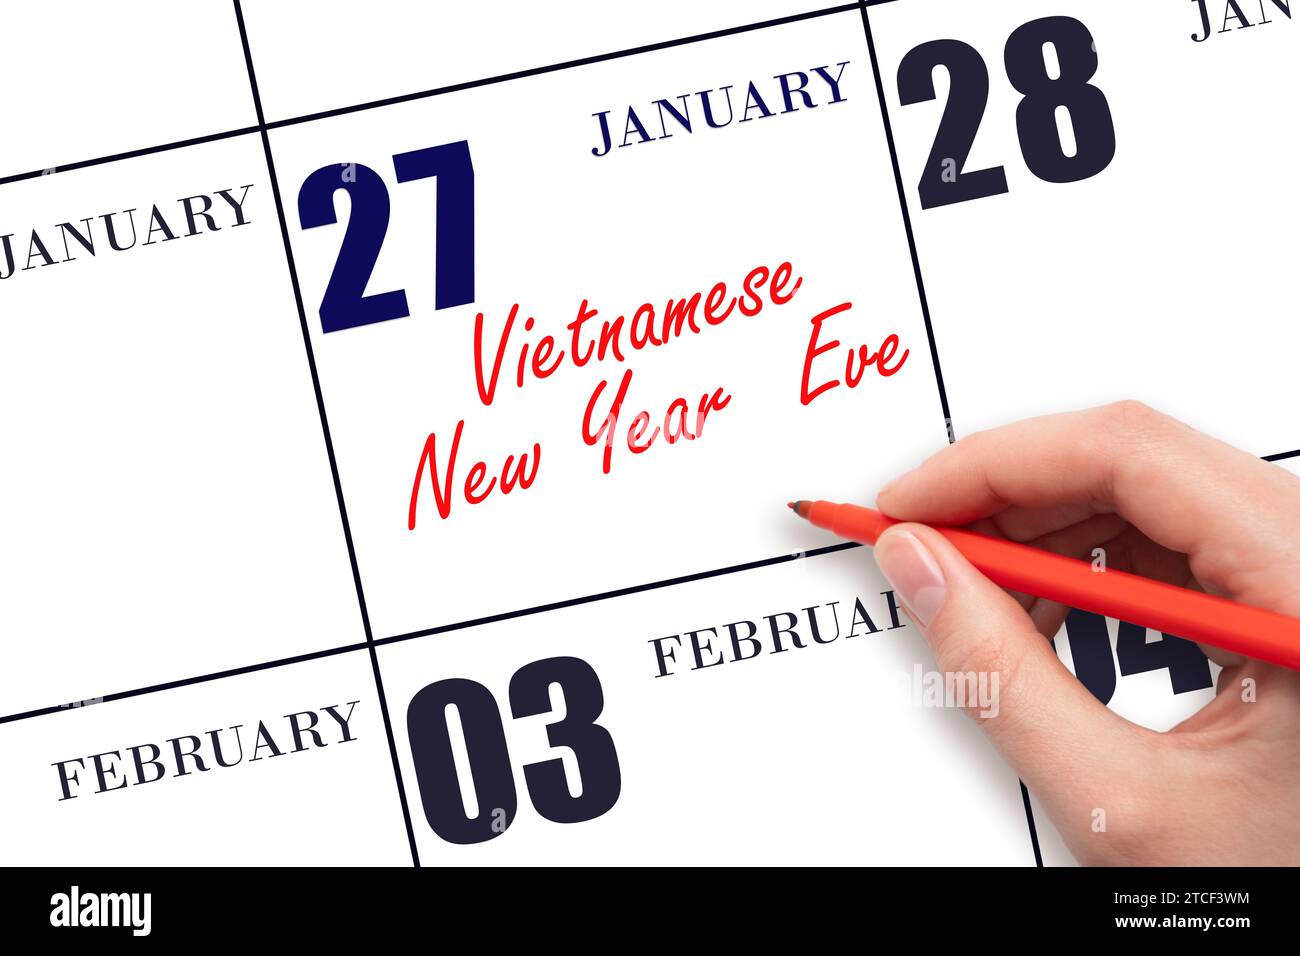 January 27. Hand writing text Vietnamese New Year Eve on calendar date. Save the date. Holiday. Day of the year concept. Stock Photo